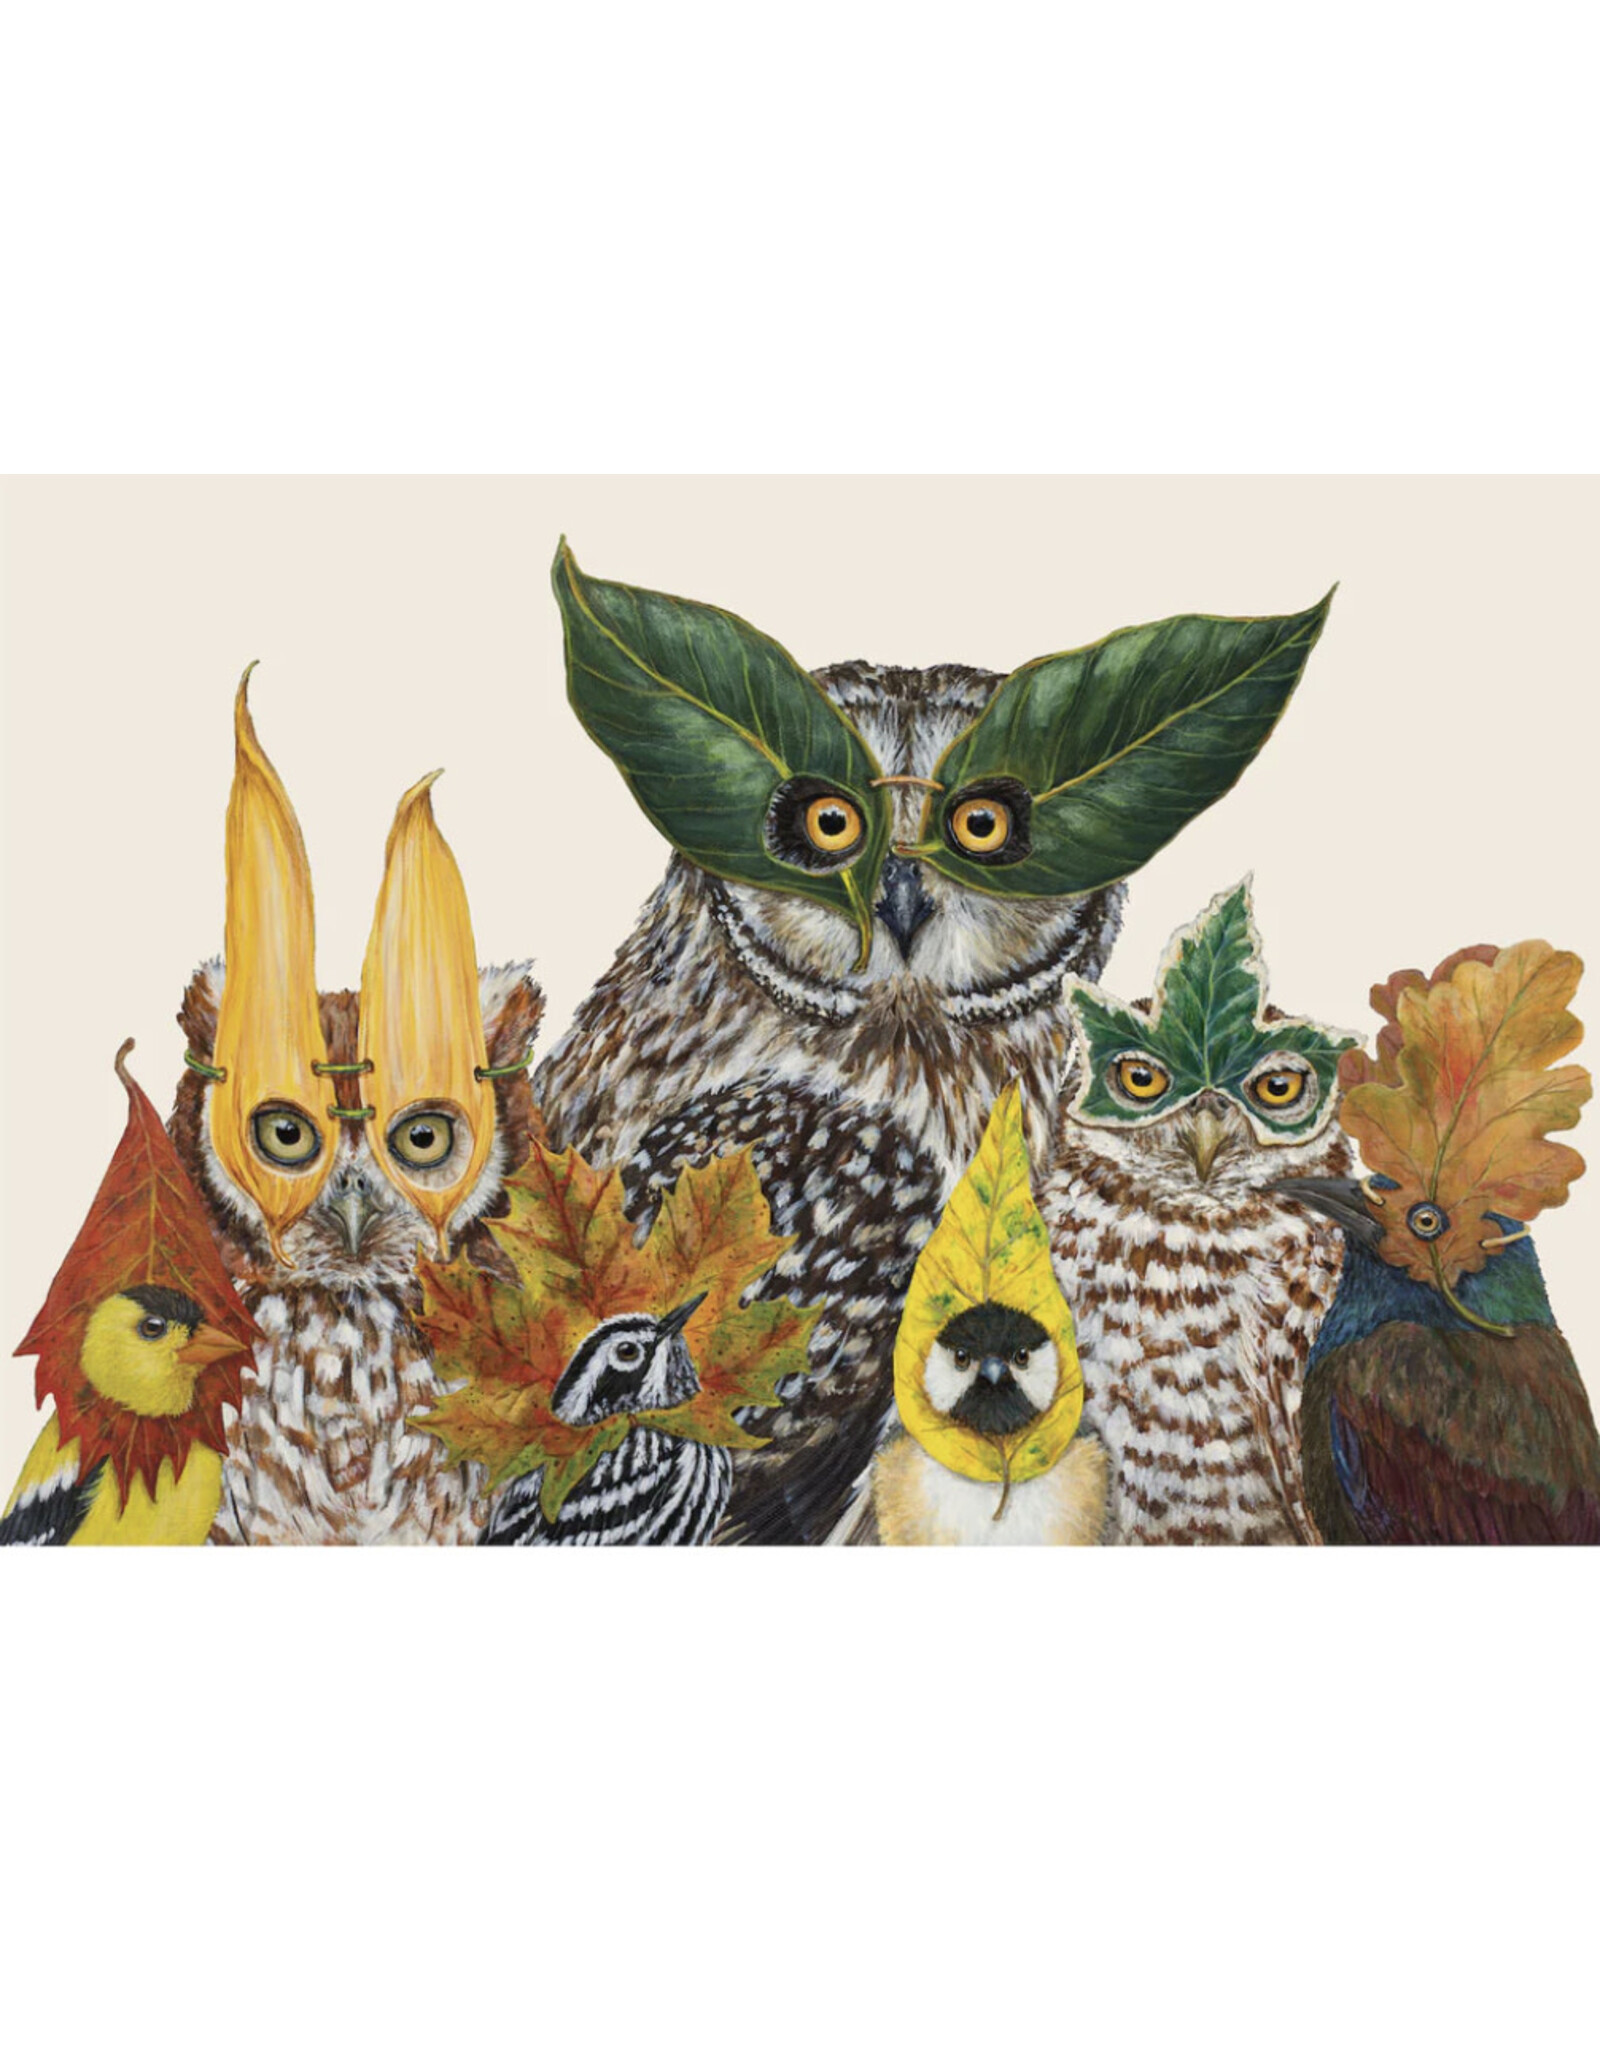 Hester & Cook Fall Masquerade Placemats